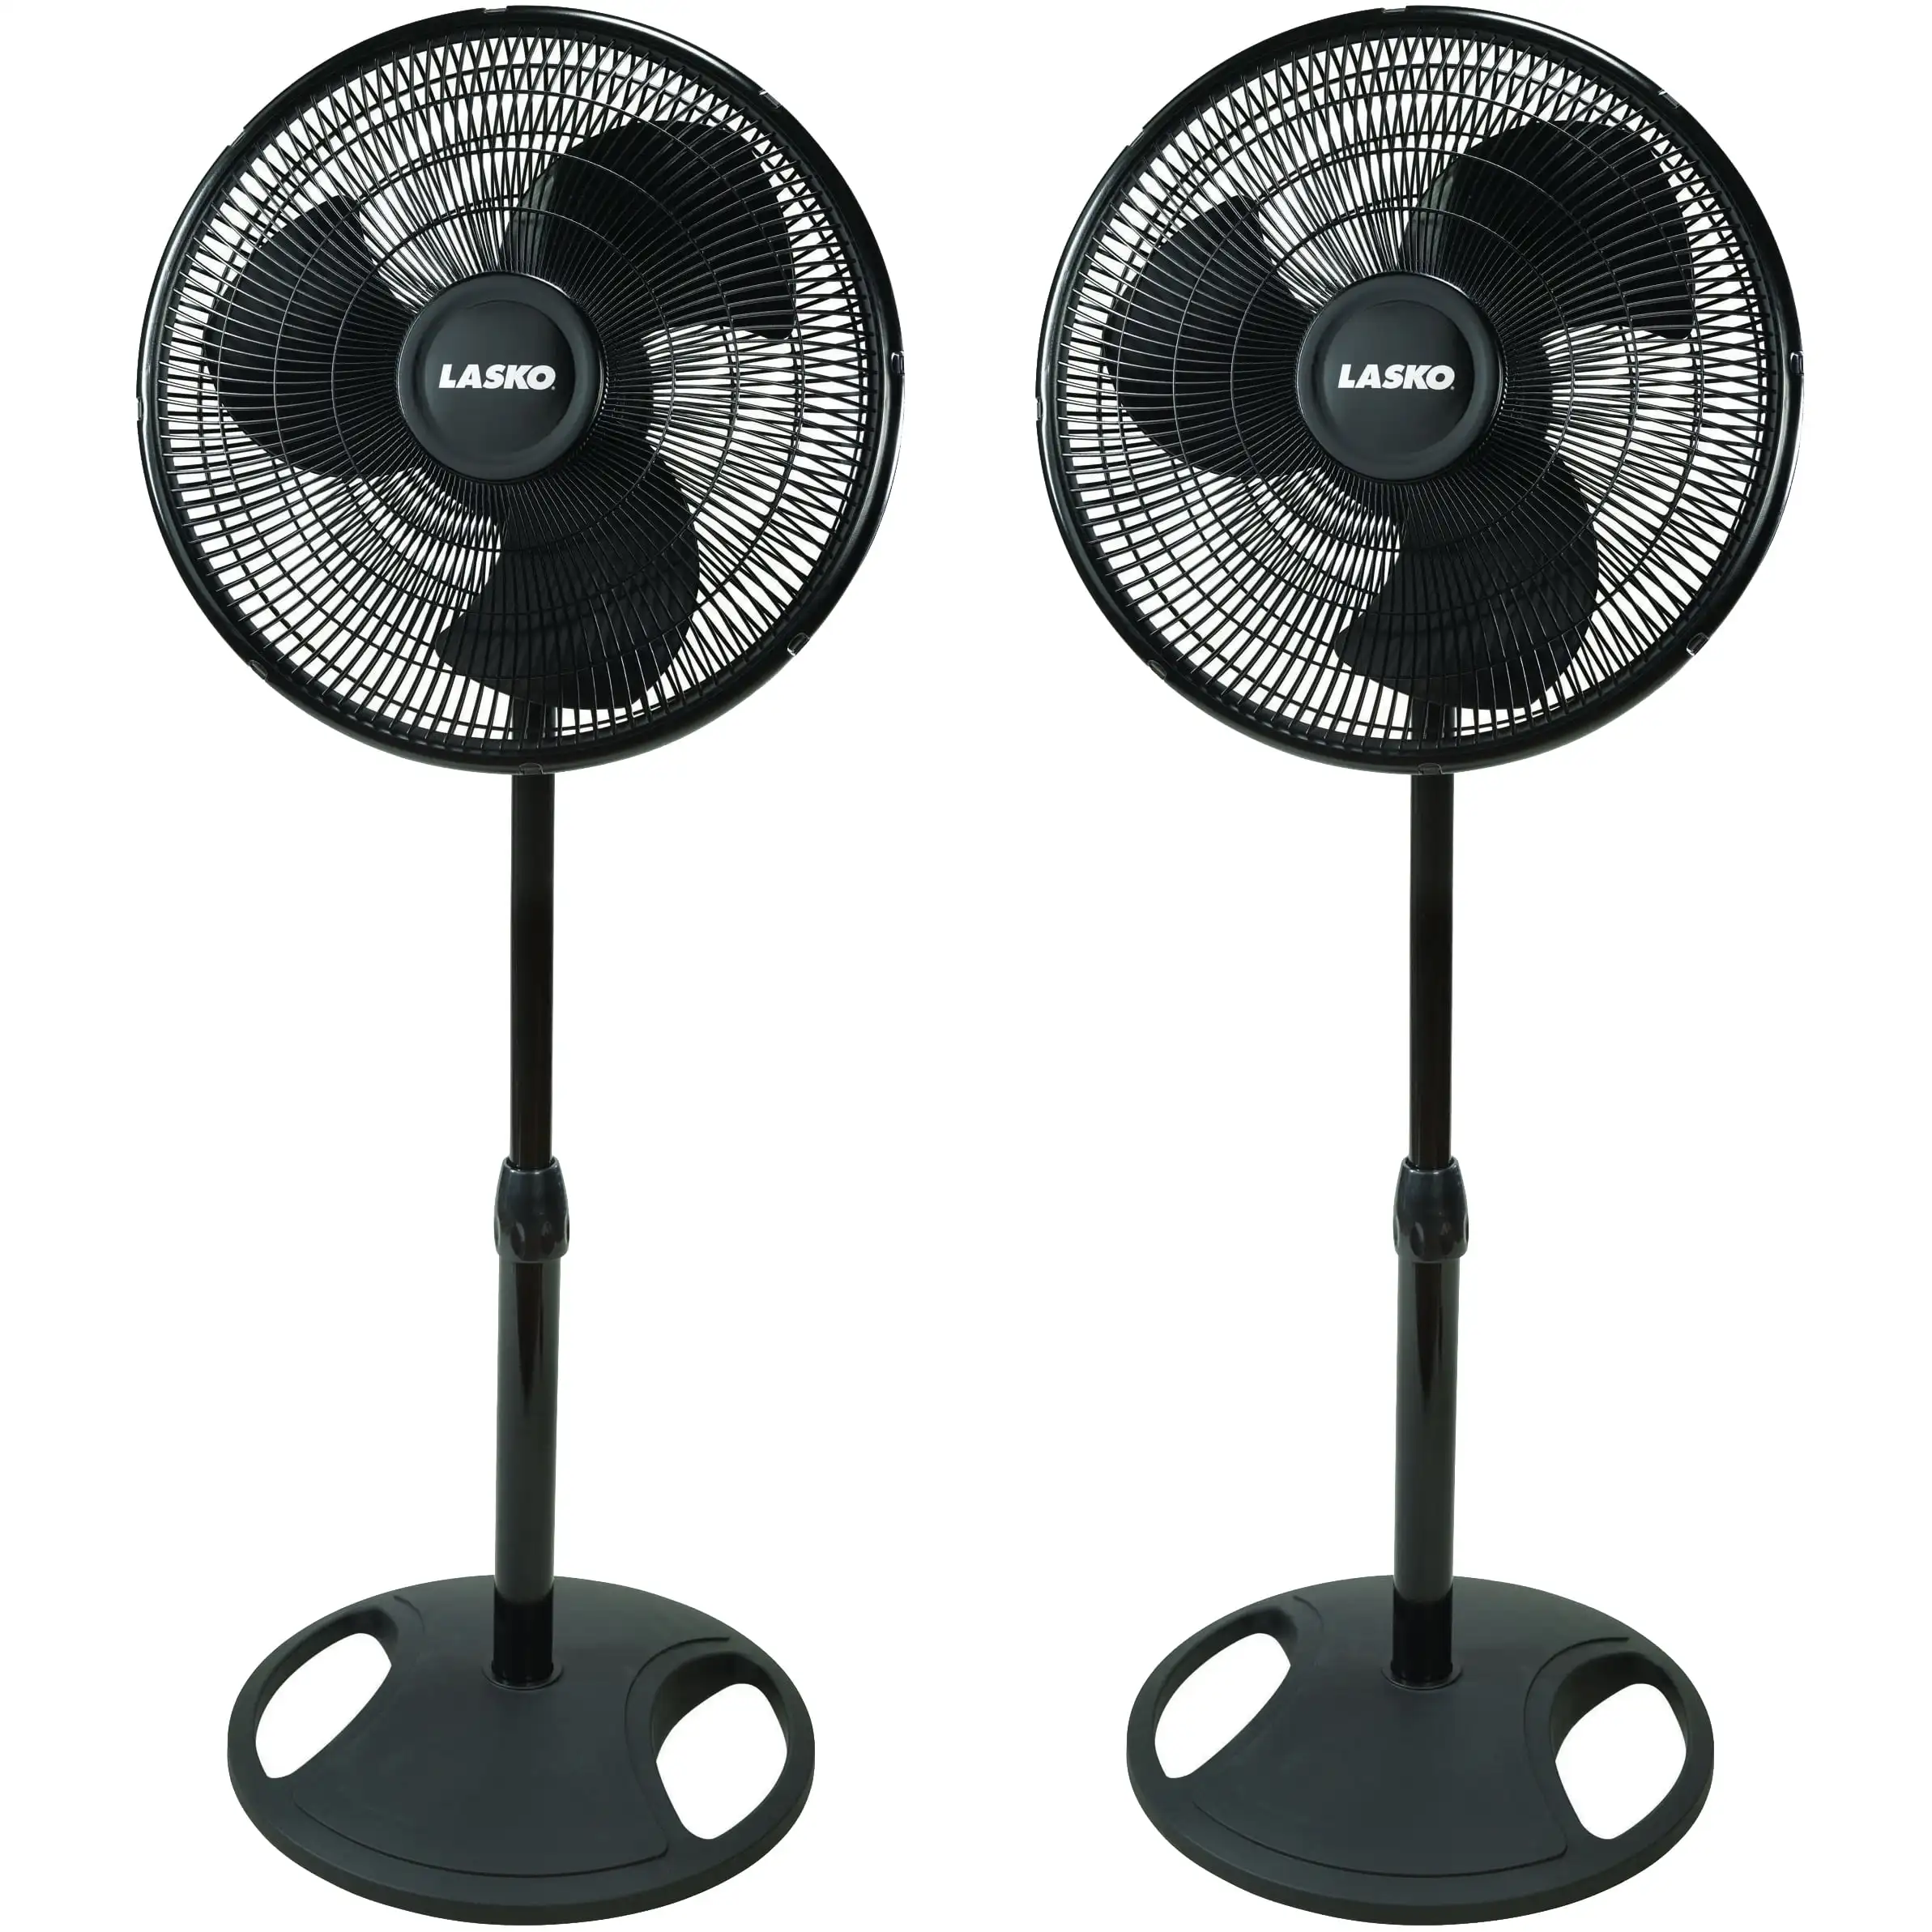 

Products 16" Oscillating Stand Fan, Black 2521, 2 pack